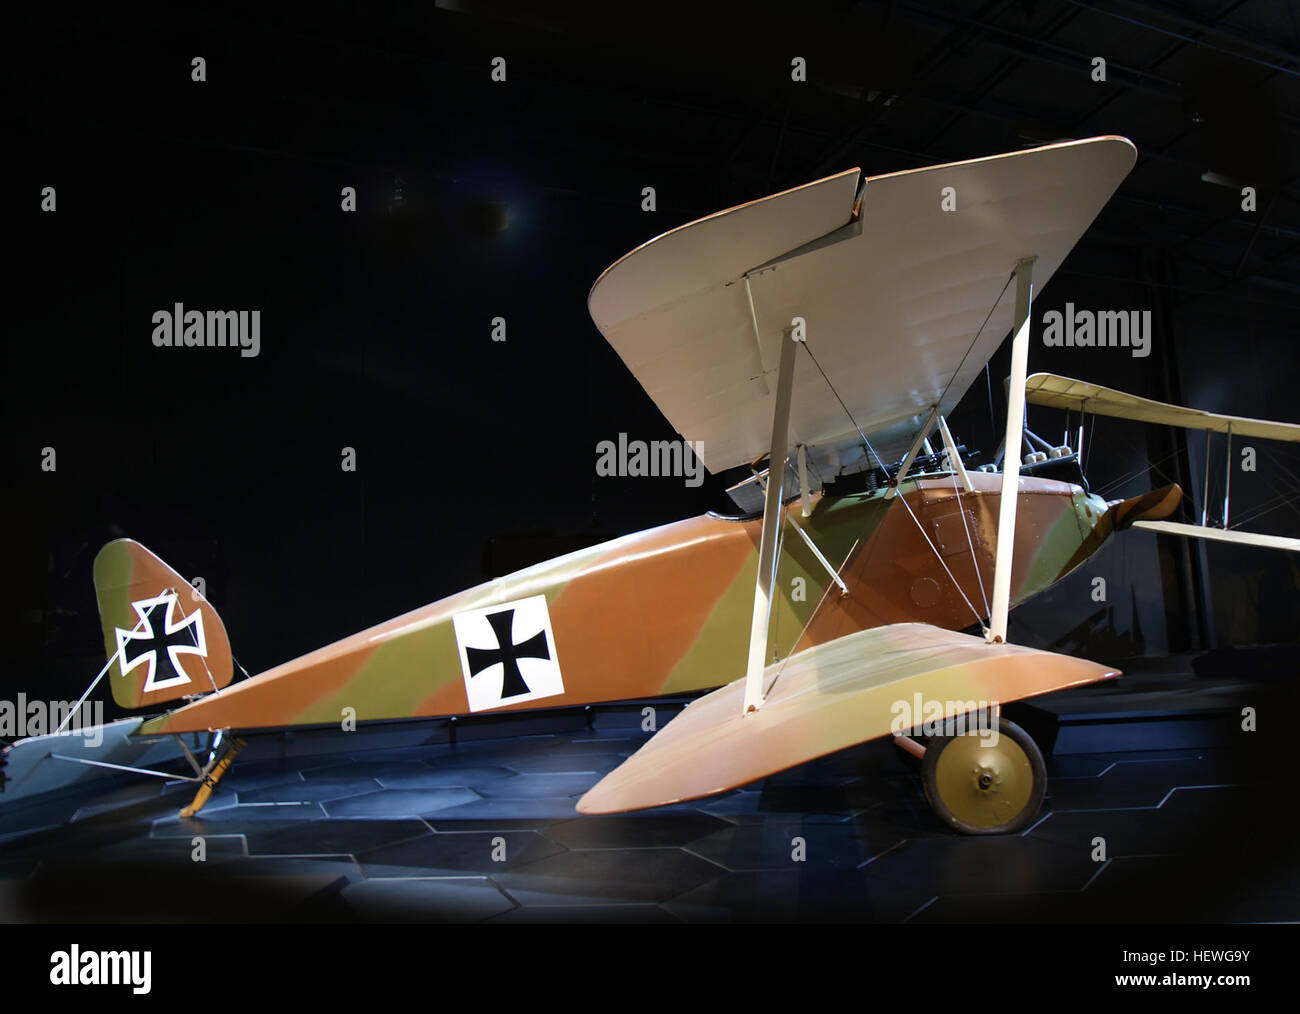 The Halberstadt D.II was a biplane fighter aircraft of the Luftstreitkräfte (Imperial German Army Air Service) that served through the period of Allied air superiority in early 1916. As the first-ever biplane configuration fighter aircraft to serve in combat for the German Empire, it had begun to be superseded in the then-forming Jagdstaffeln by the superior Albatros fighters by the autumn of that year, although small numbers of Halberstadts continued in use well into 1917. Stock Photo